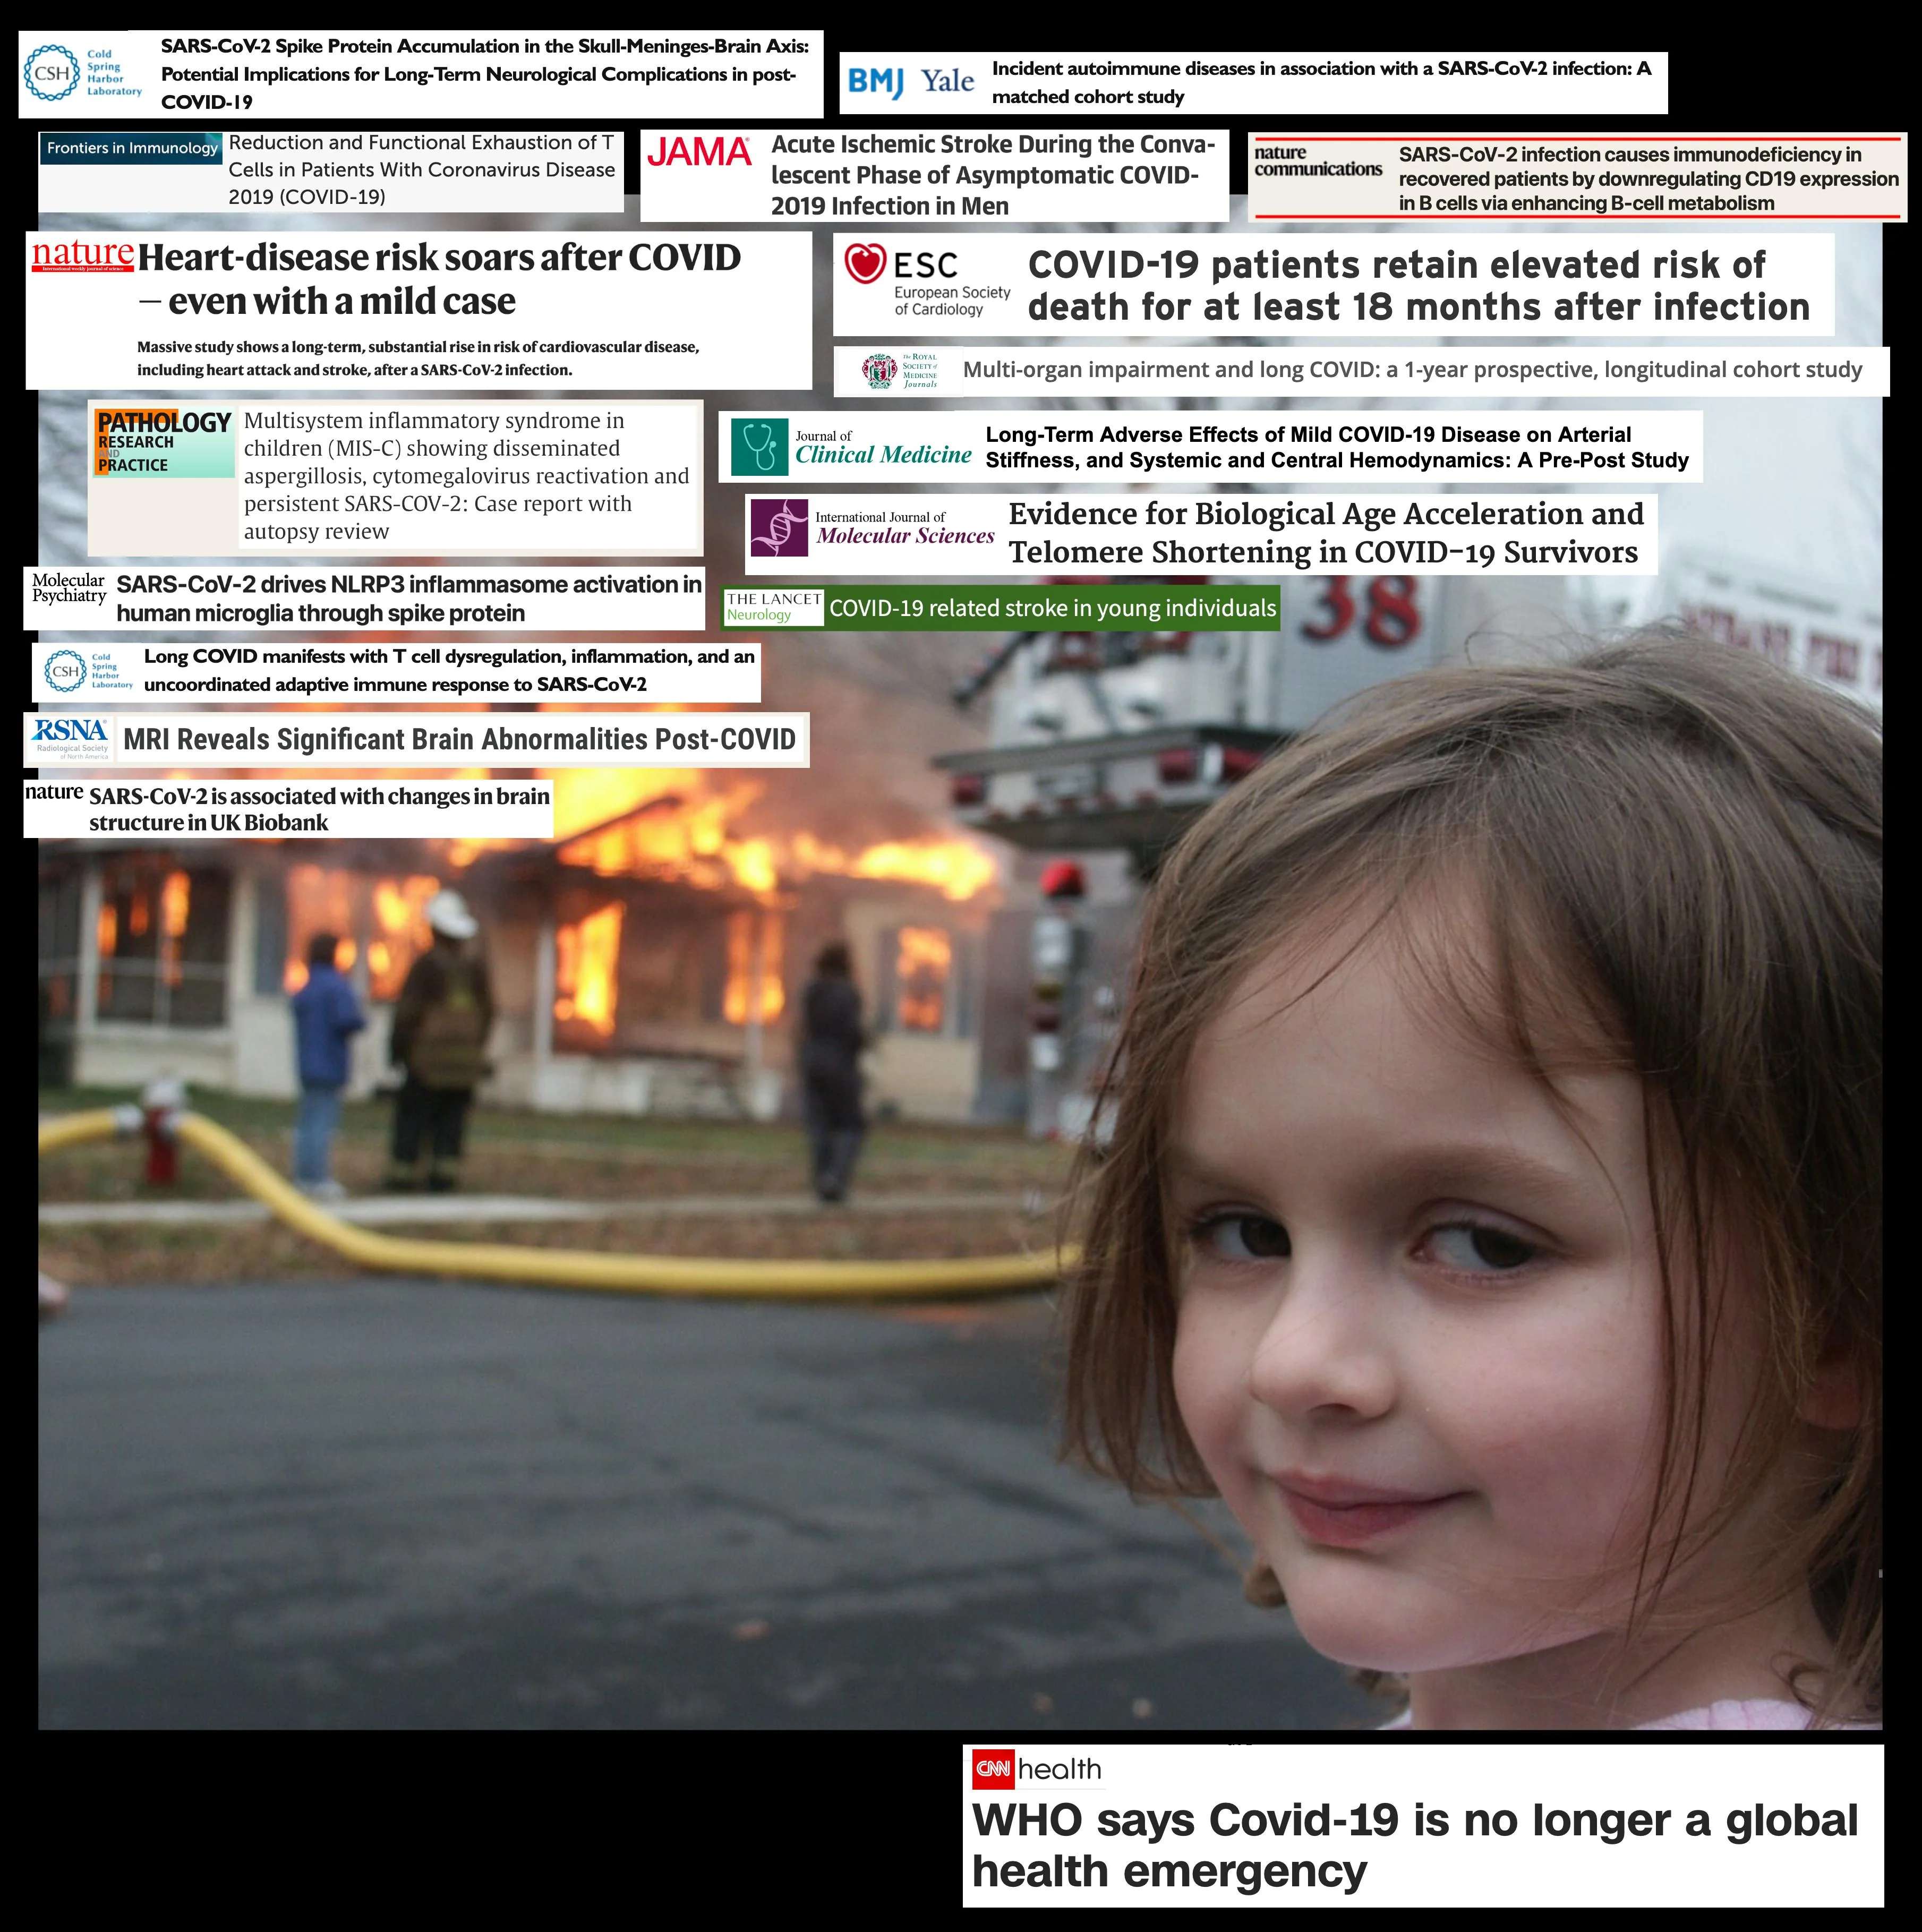 The meme of the child looking away from a burning building toward the camera with a deadpan look of bemused acceptance